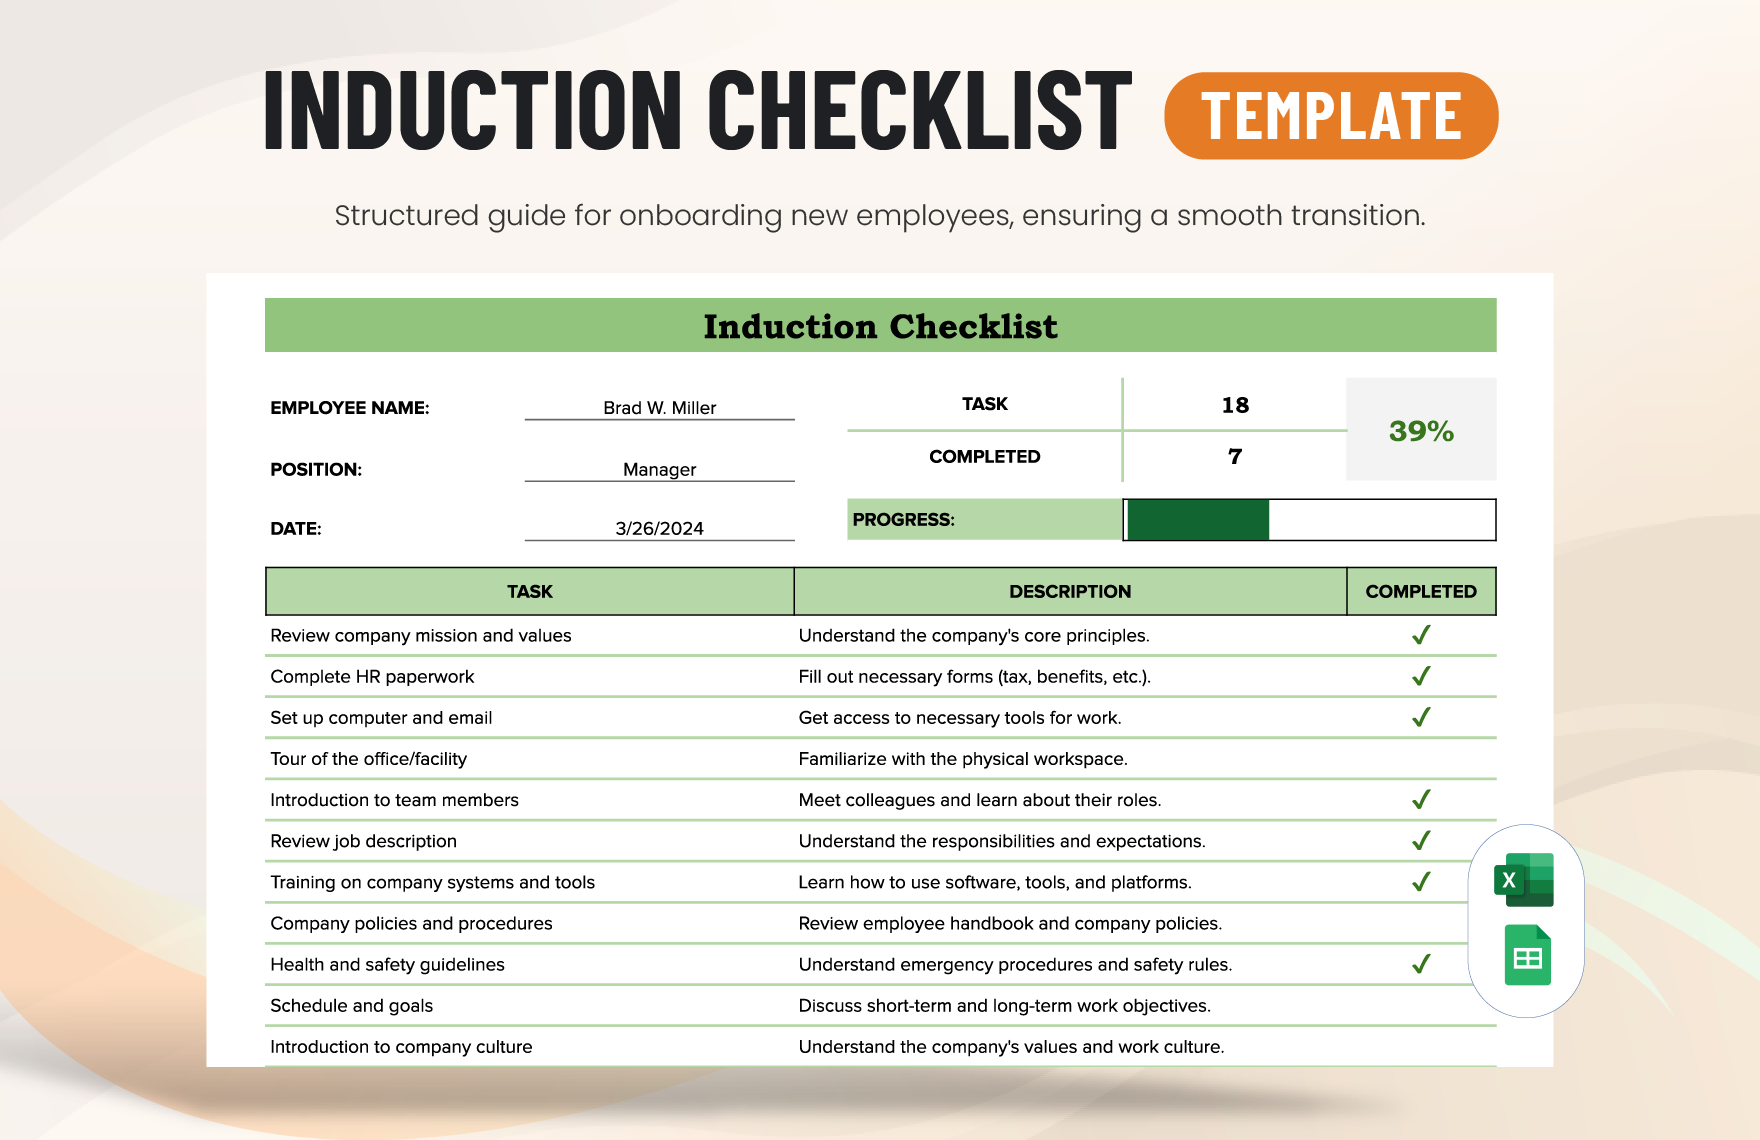 Induction Checklist Template in Excel, Google Sheets